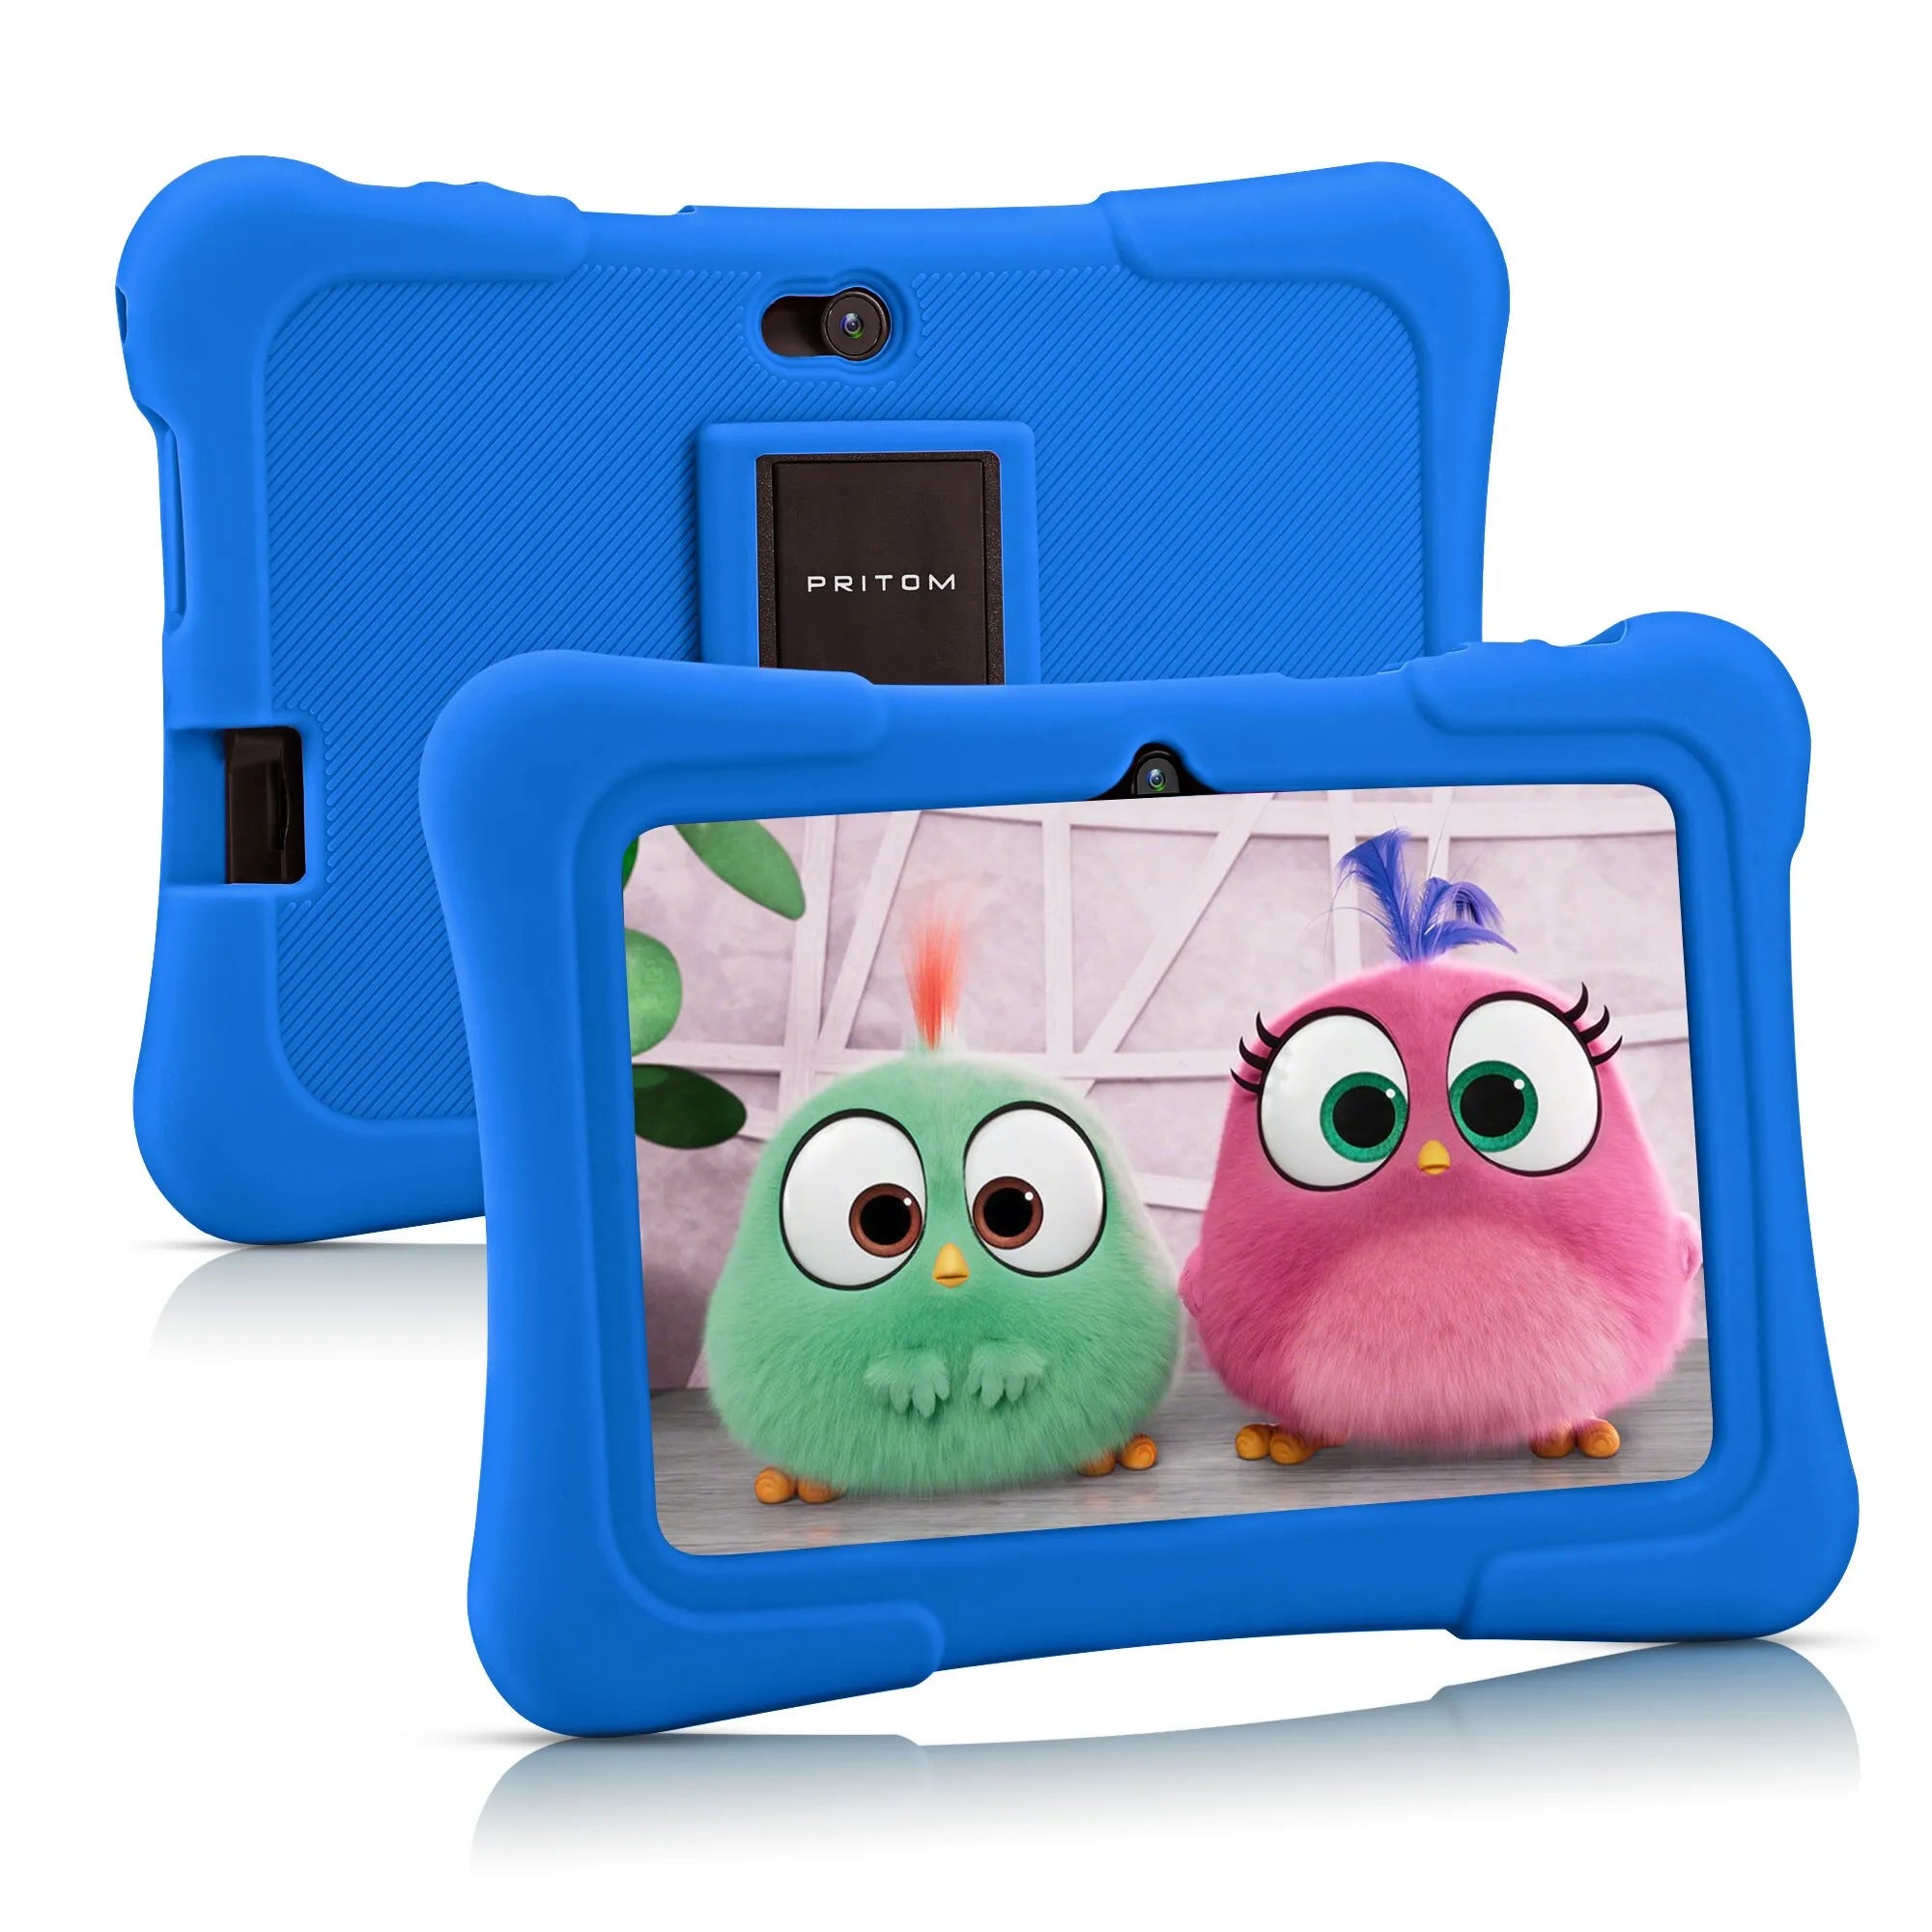 PRITOM 7 Inch Kids Tablet - Quad Core, Android 10, 32GB, WiFi, Bluetooth, Educational Software Installed EU / dark blue